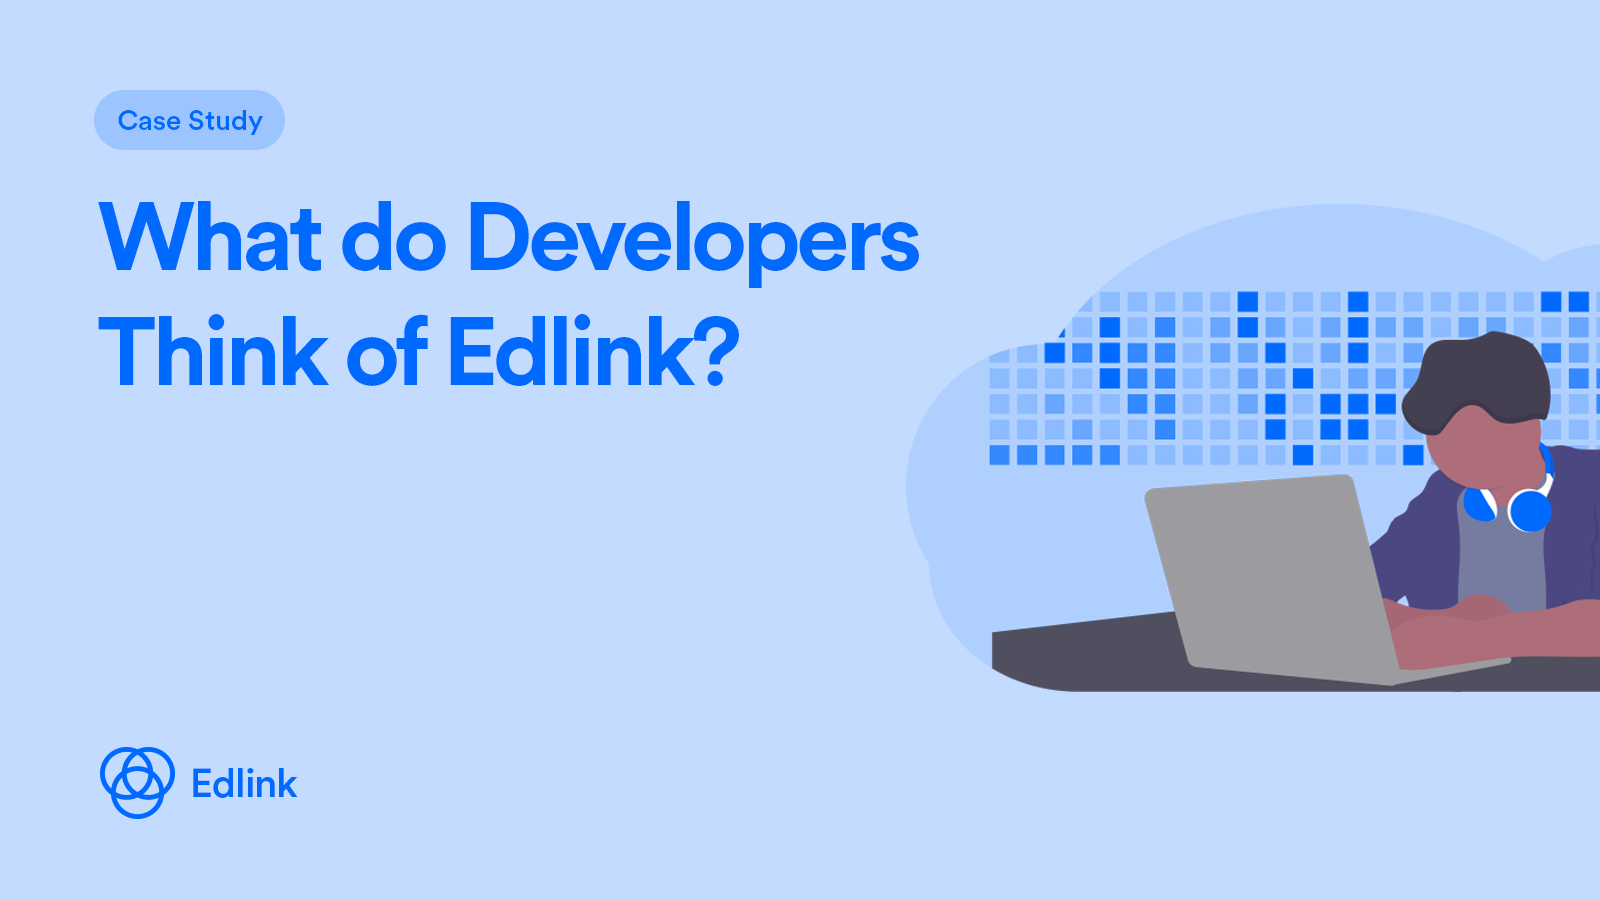 Wondering what developers really think of Edlink?